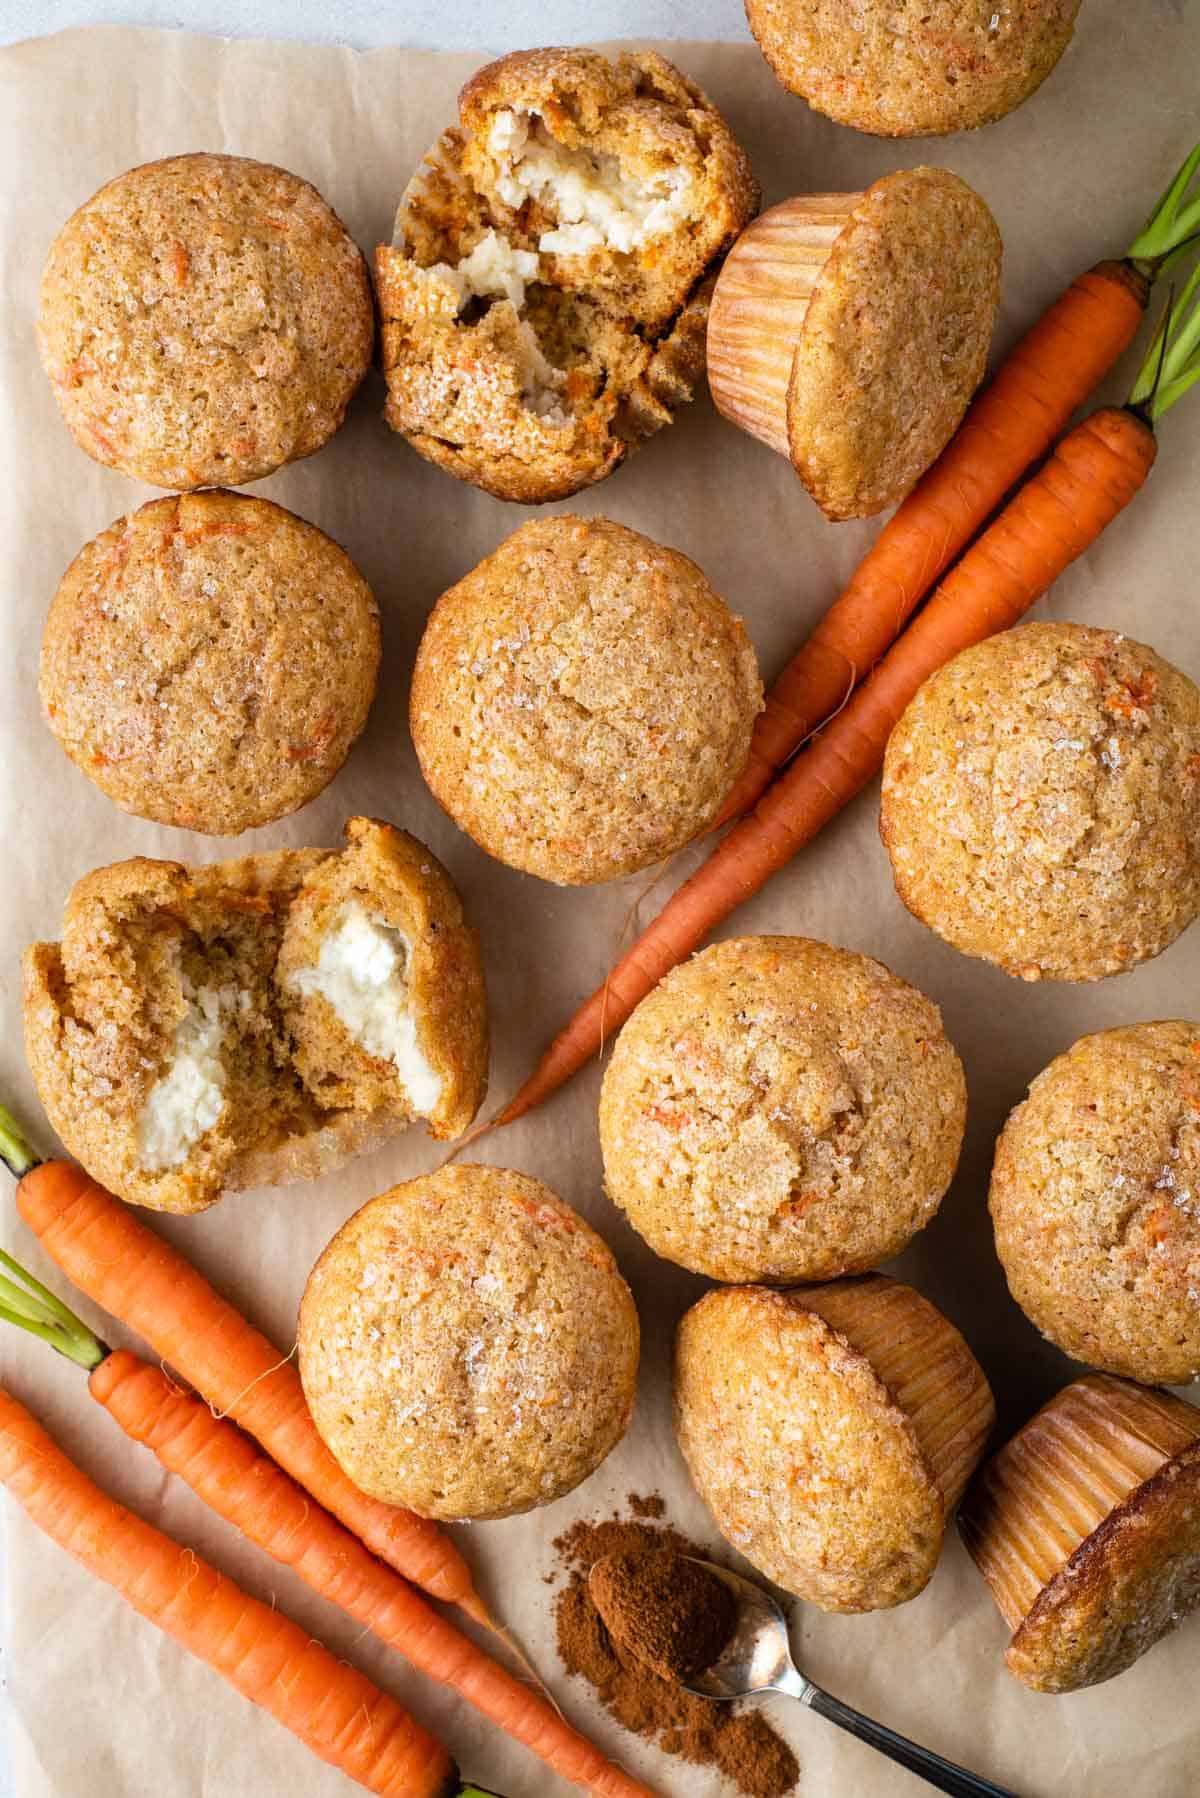 carrot cake muffins arranged around carrots, a spoon of spices, and one muffin broken open to reveal the cream cheese filling inside